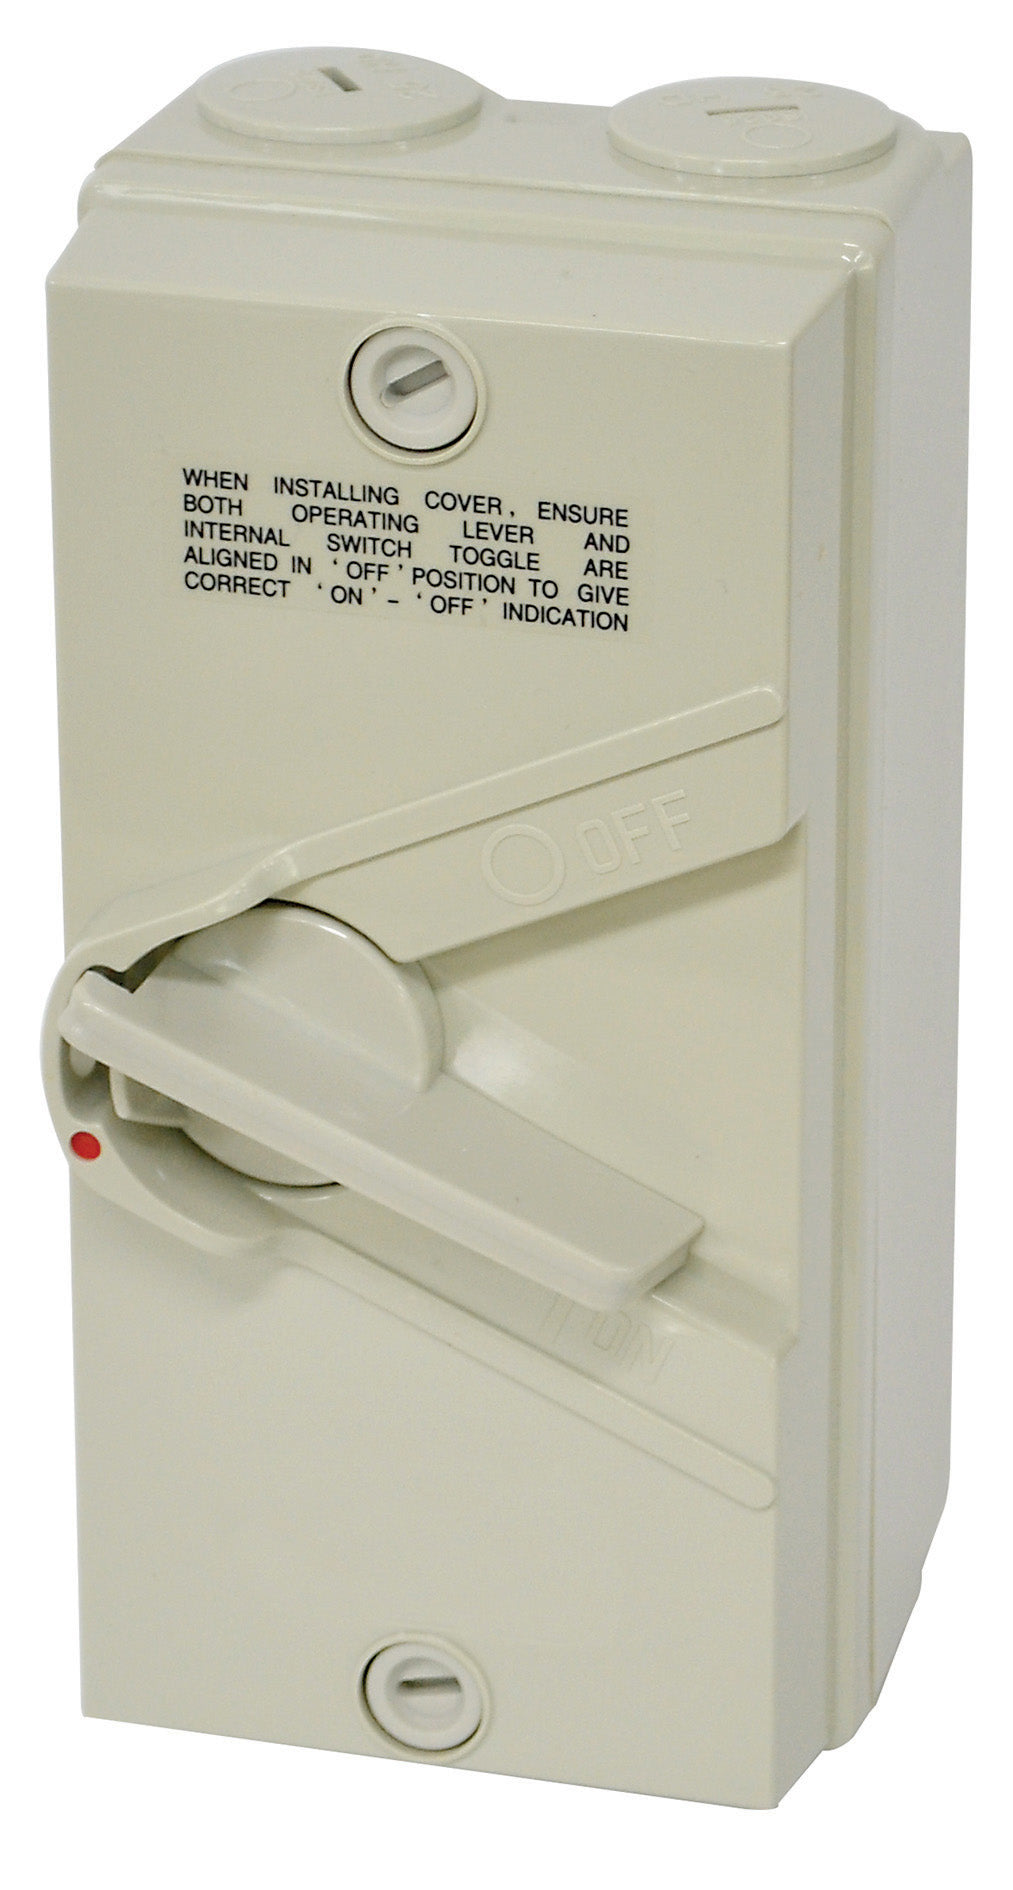 SINGLE POLE WEATHERPROOF ISOLATING SWITCH 250V 20A IP66 - IS120